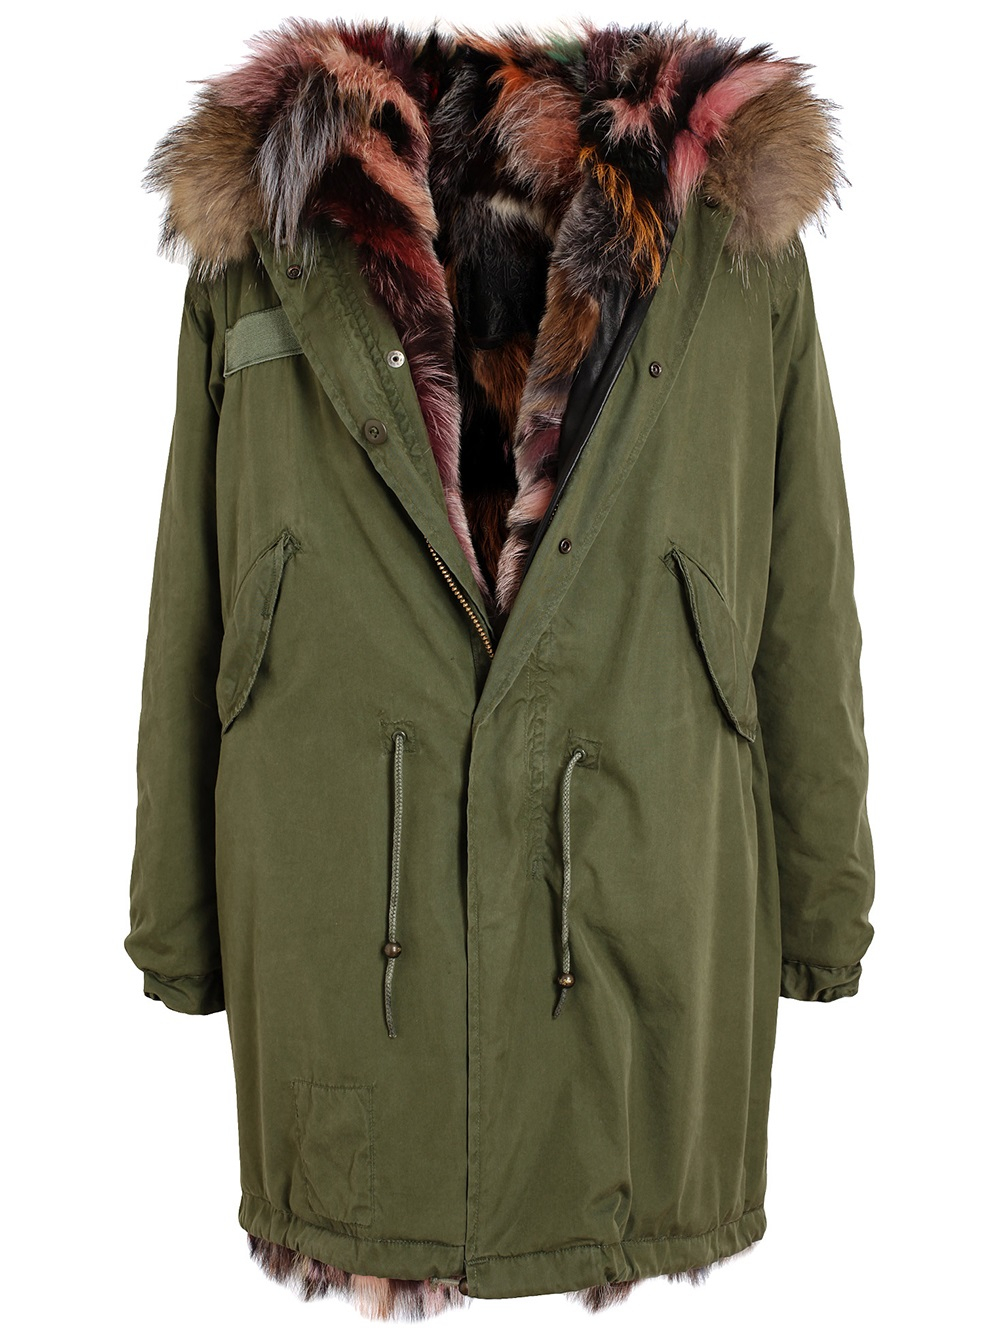 Lyst - Mr & Mrs Italy Multicoloured Fur Lined Parka in Green